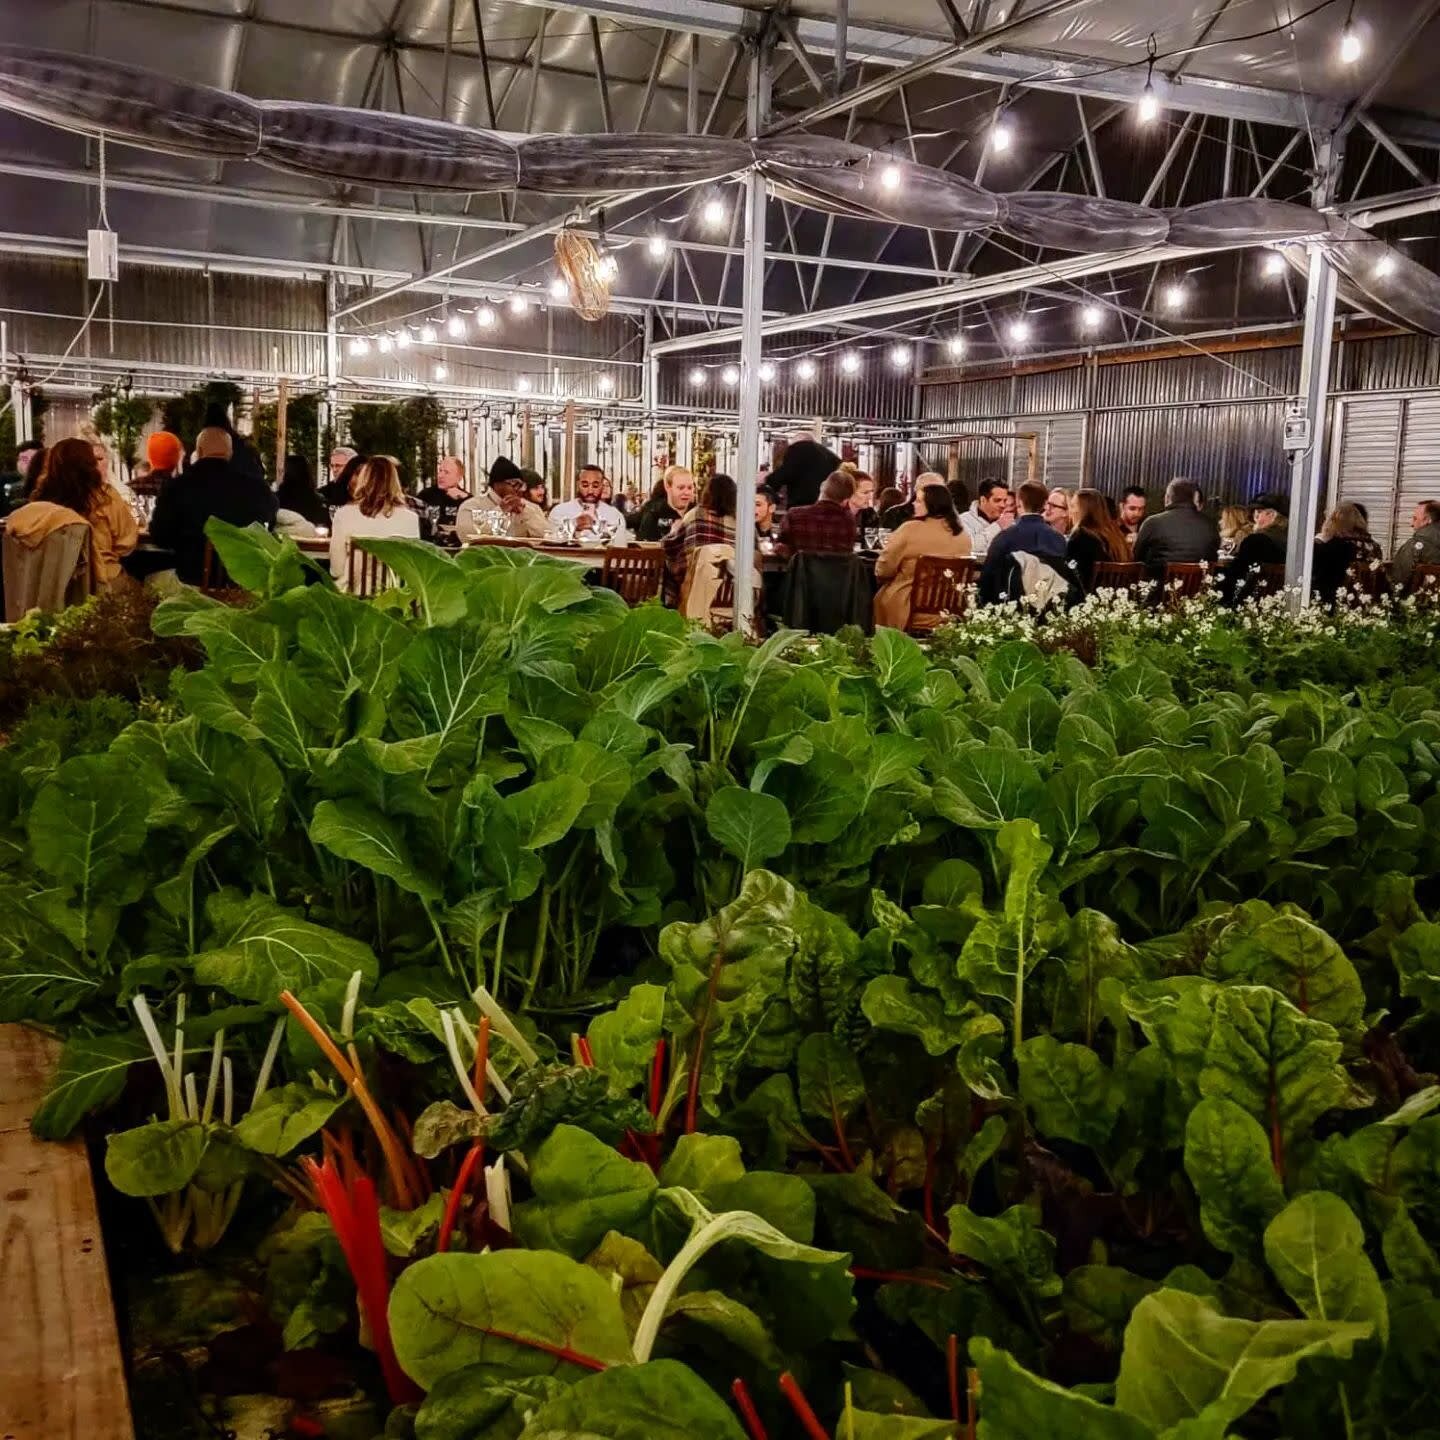 &quot;Local food is the foundation of community, economy, and sustainability.&quot; - Unknown

#dallas #foodie #farm #dfw #farmers #urbanfarm #microgreens #shoplocal #farmershelpingfarmers #profoundfarm #profoundfoods #farmtotable #dallaschef #lucast